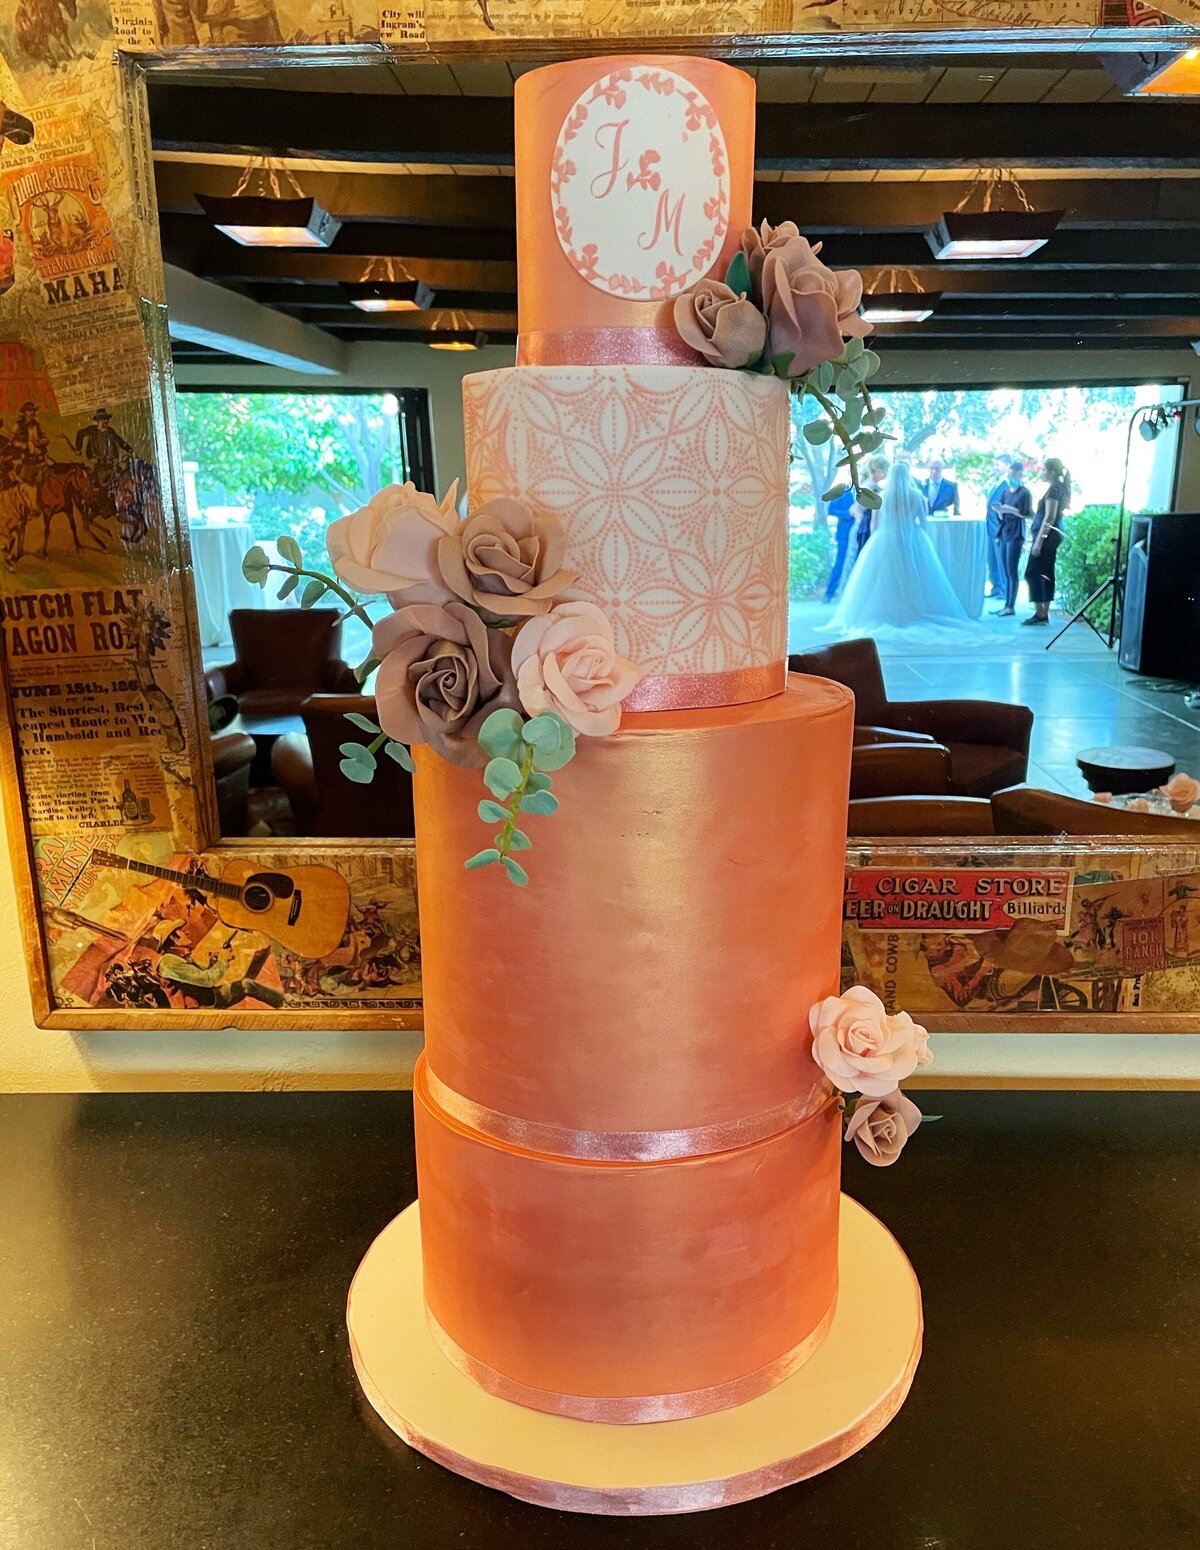 Tall 4 tier rose gold wedding cake. Top tier with sugar roses and decorative monogram plaque; 2 nd tier is white with rose gold abstract leaf stencil; 3rd and bottom tiers are rose gold with sugar roses , eucalyptus accents